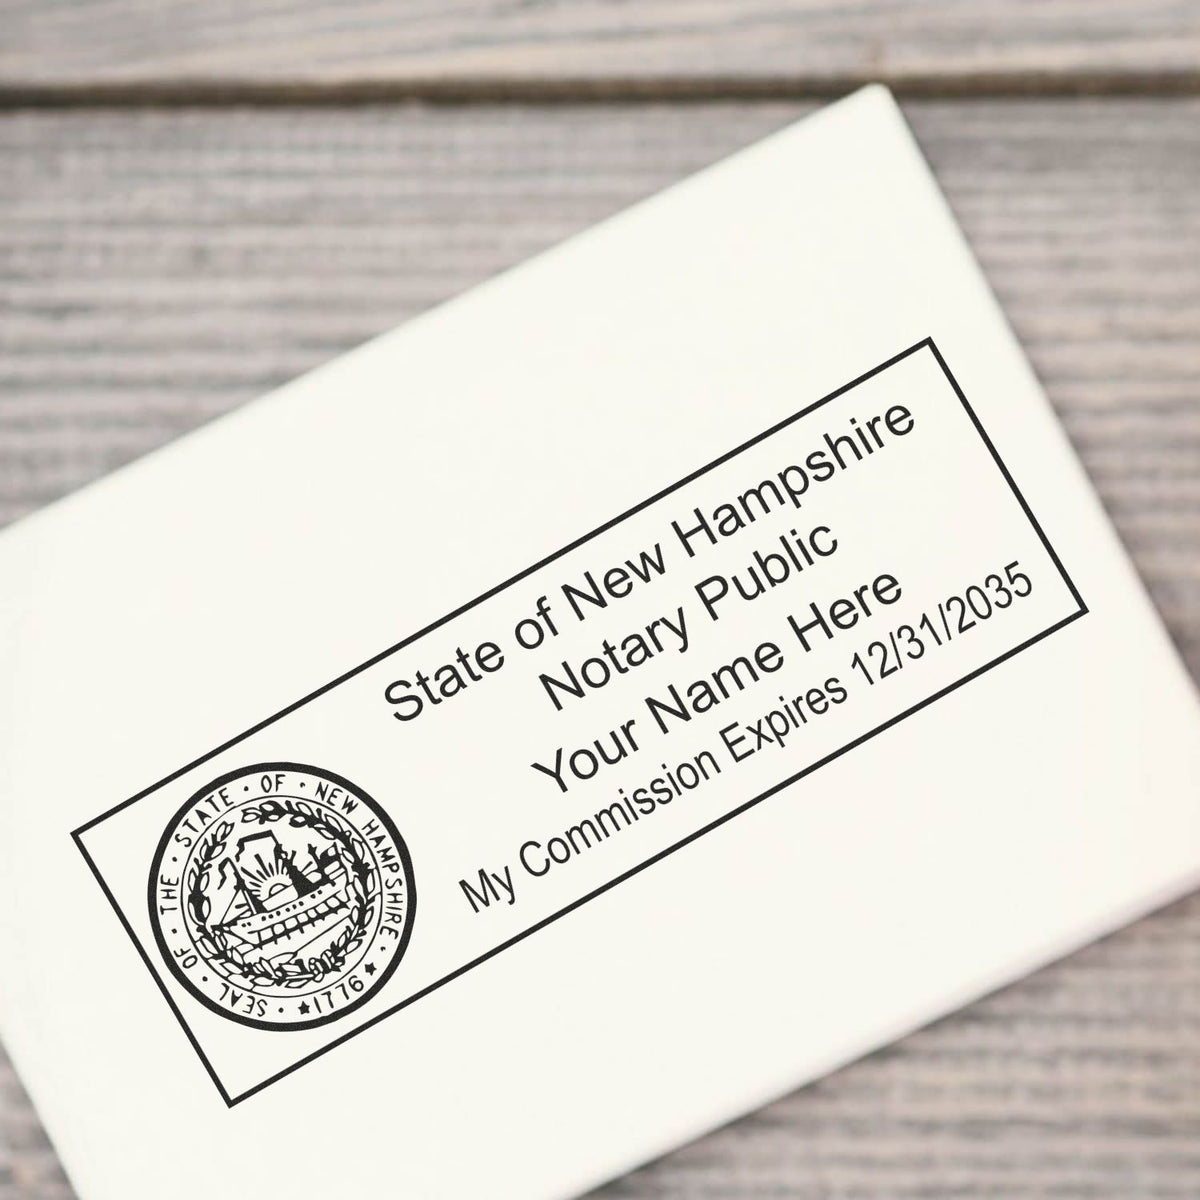 The Slim Pre-Inked State Seal Notary Stamp for New Hampshire stamp impression comes to life with a crisp, detailed photo on paper - showcasing true professional quality.